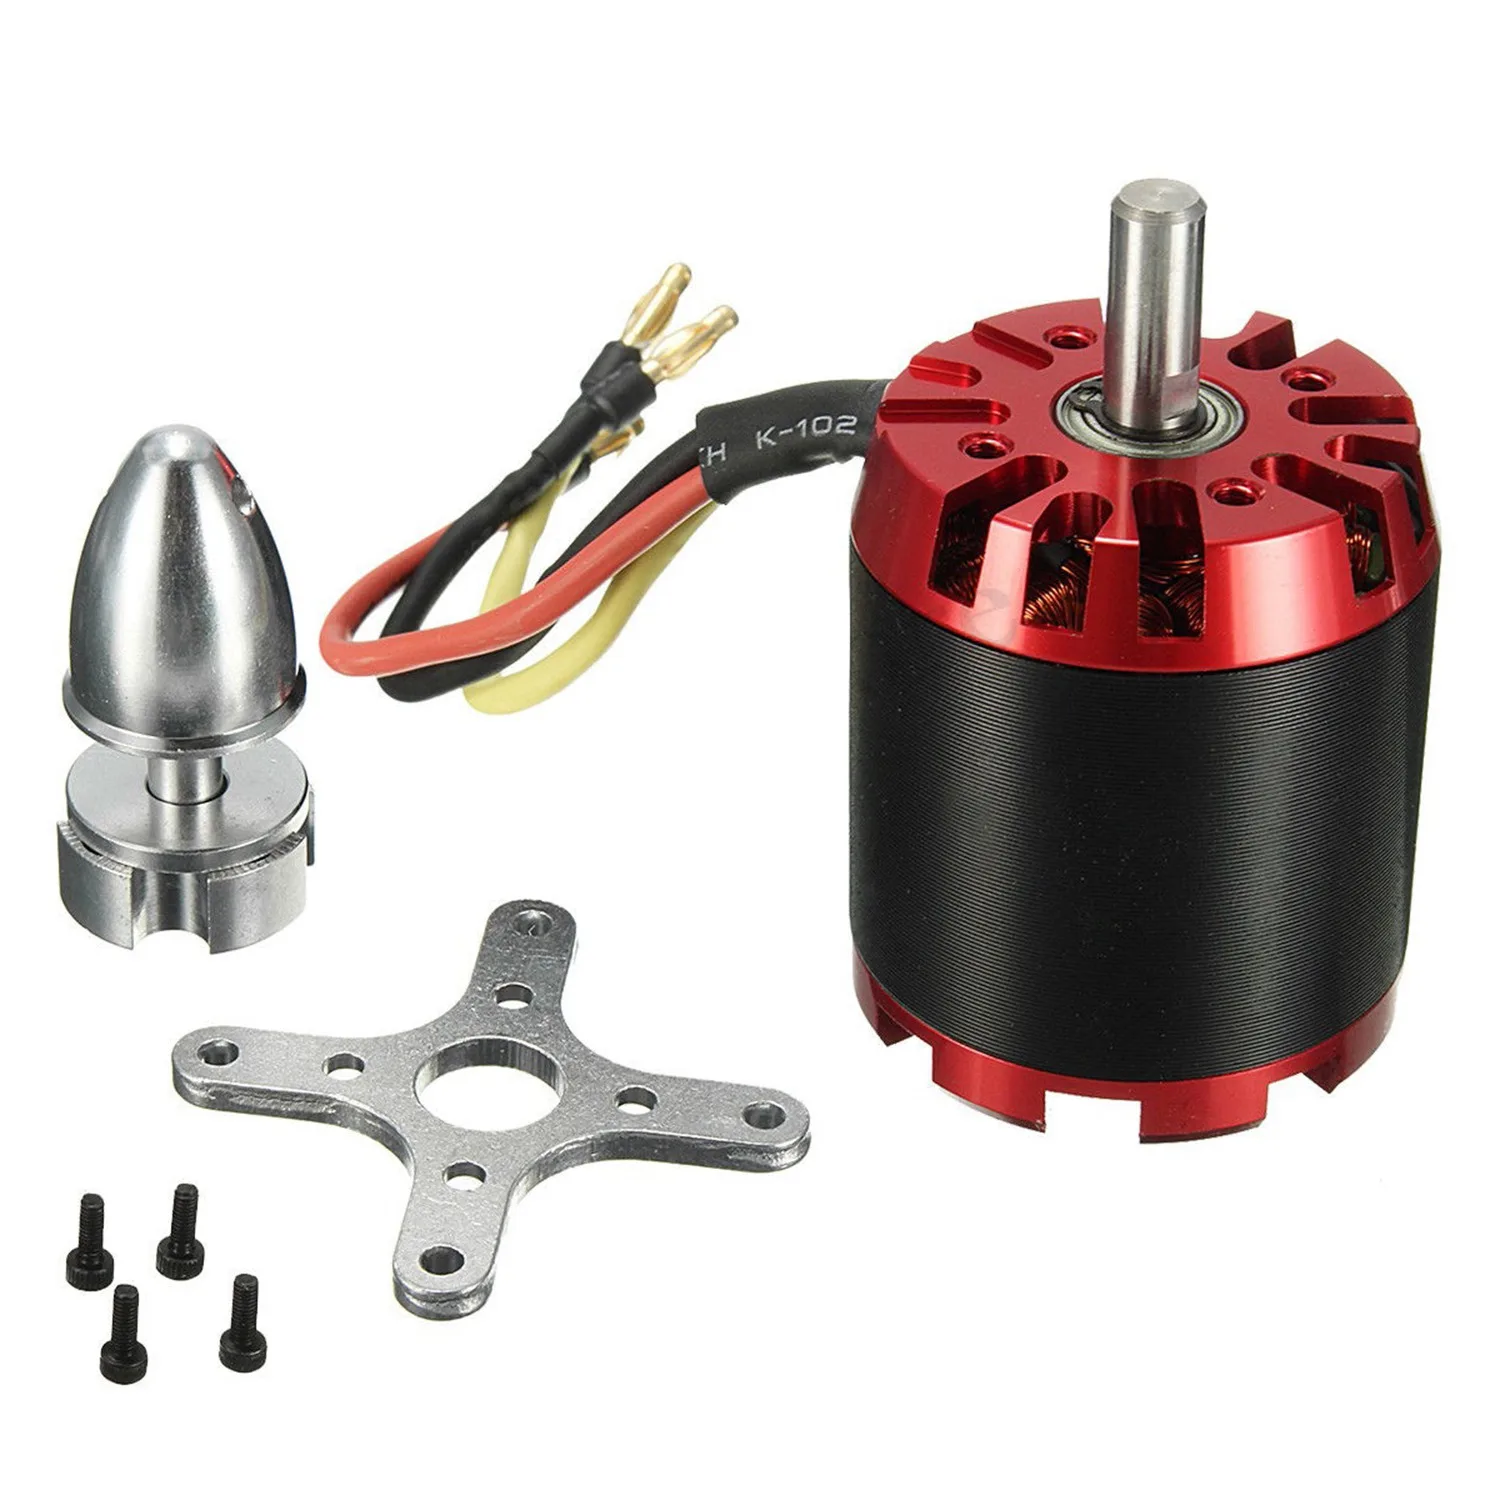 Discount HOT-DIY 270KV N5065 5065 electric scooter brushless motor four wheel scooter pulley motor RC motor 5